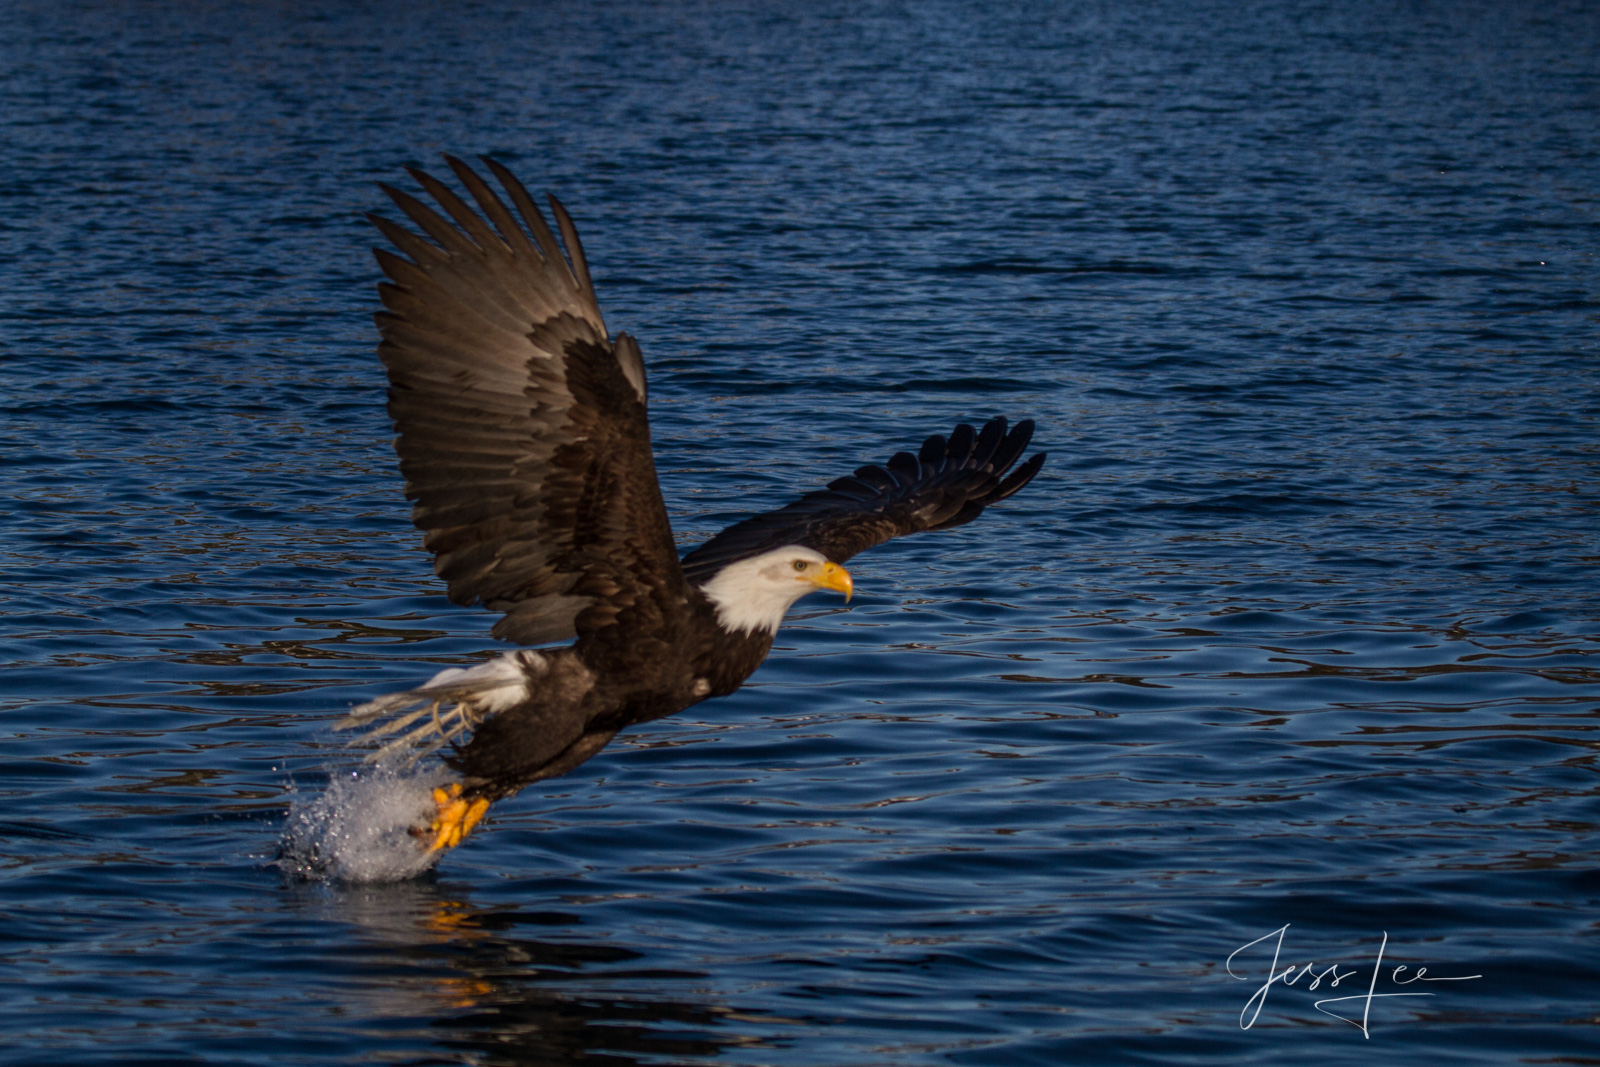 Bring home the power and beauty of the amazing fine art American Bald Eagle photograph Catch of the Day, by Jess Lee from his...